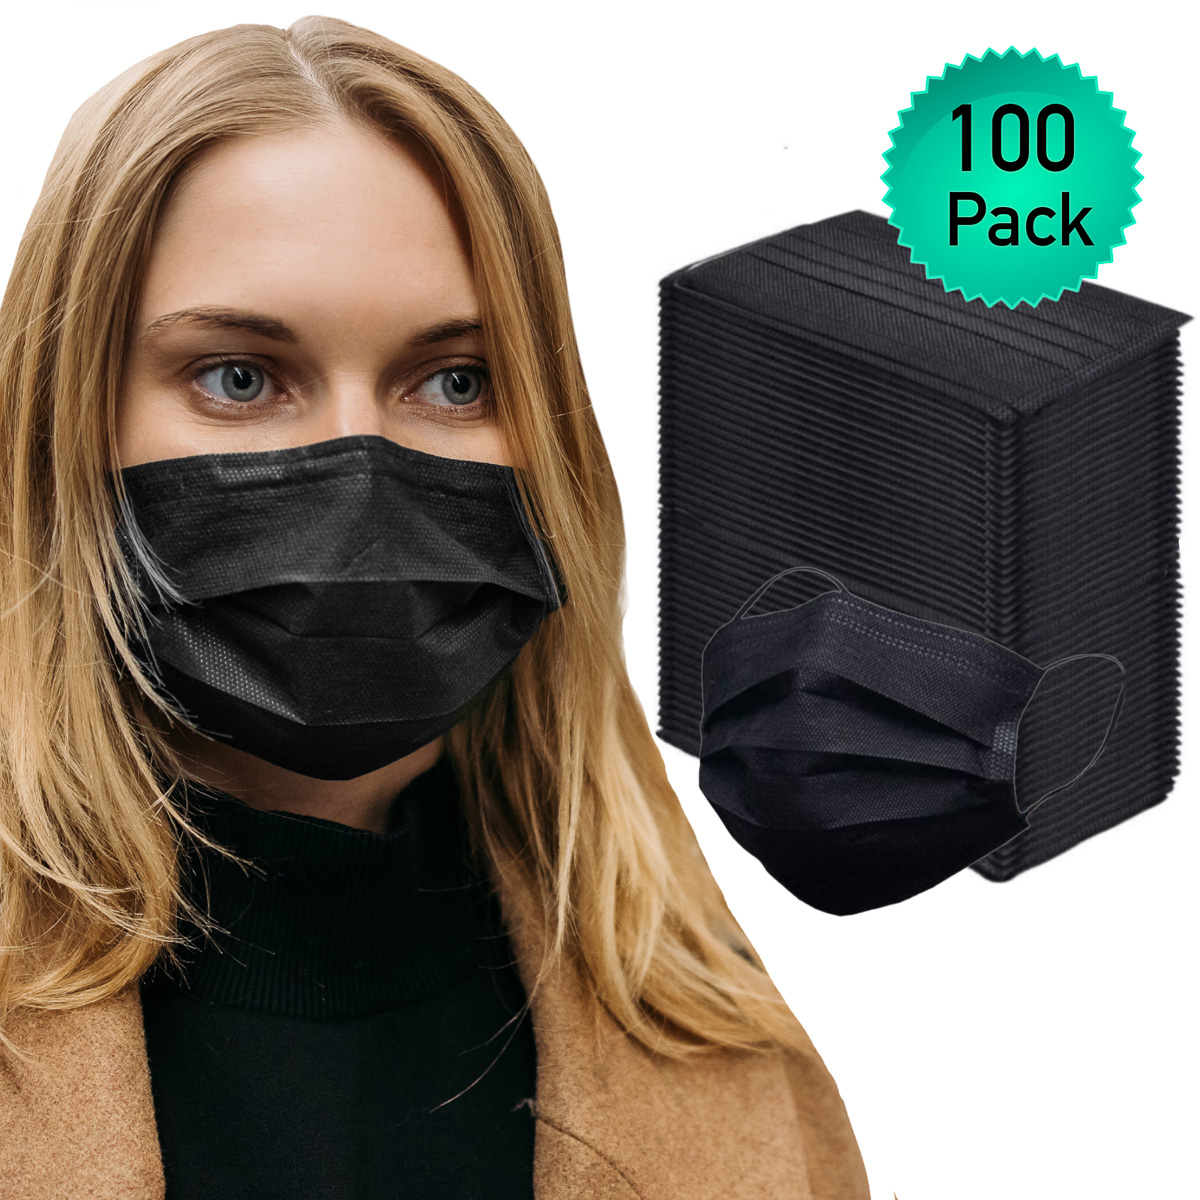 100pk Disposable Face Mask for Adults, 3 Layer Protective Ear Loop Mouth Cover - image 1 of 6